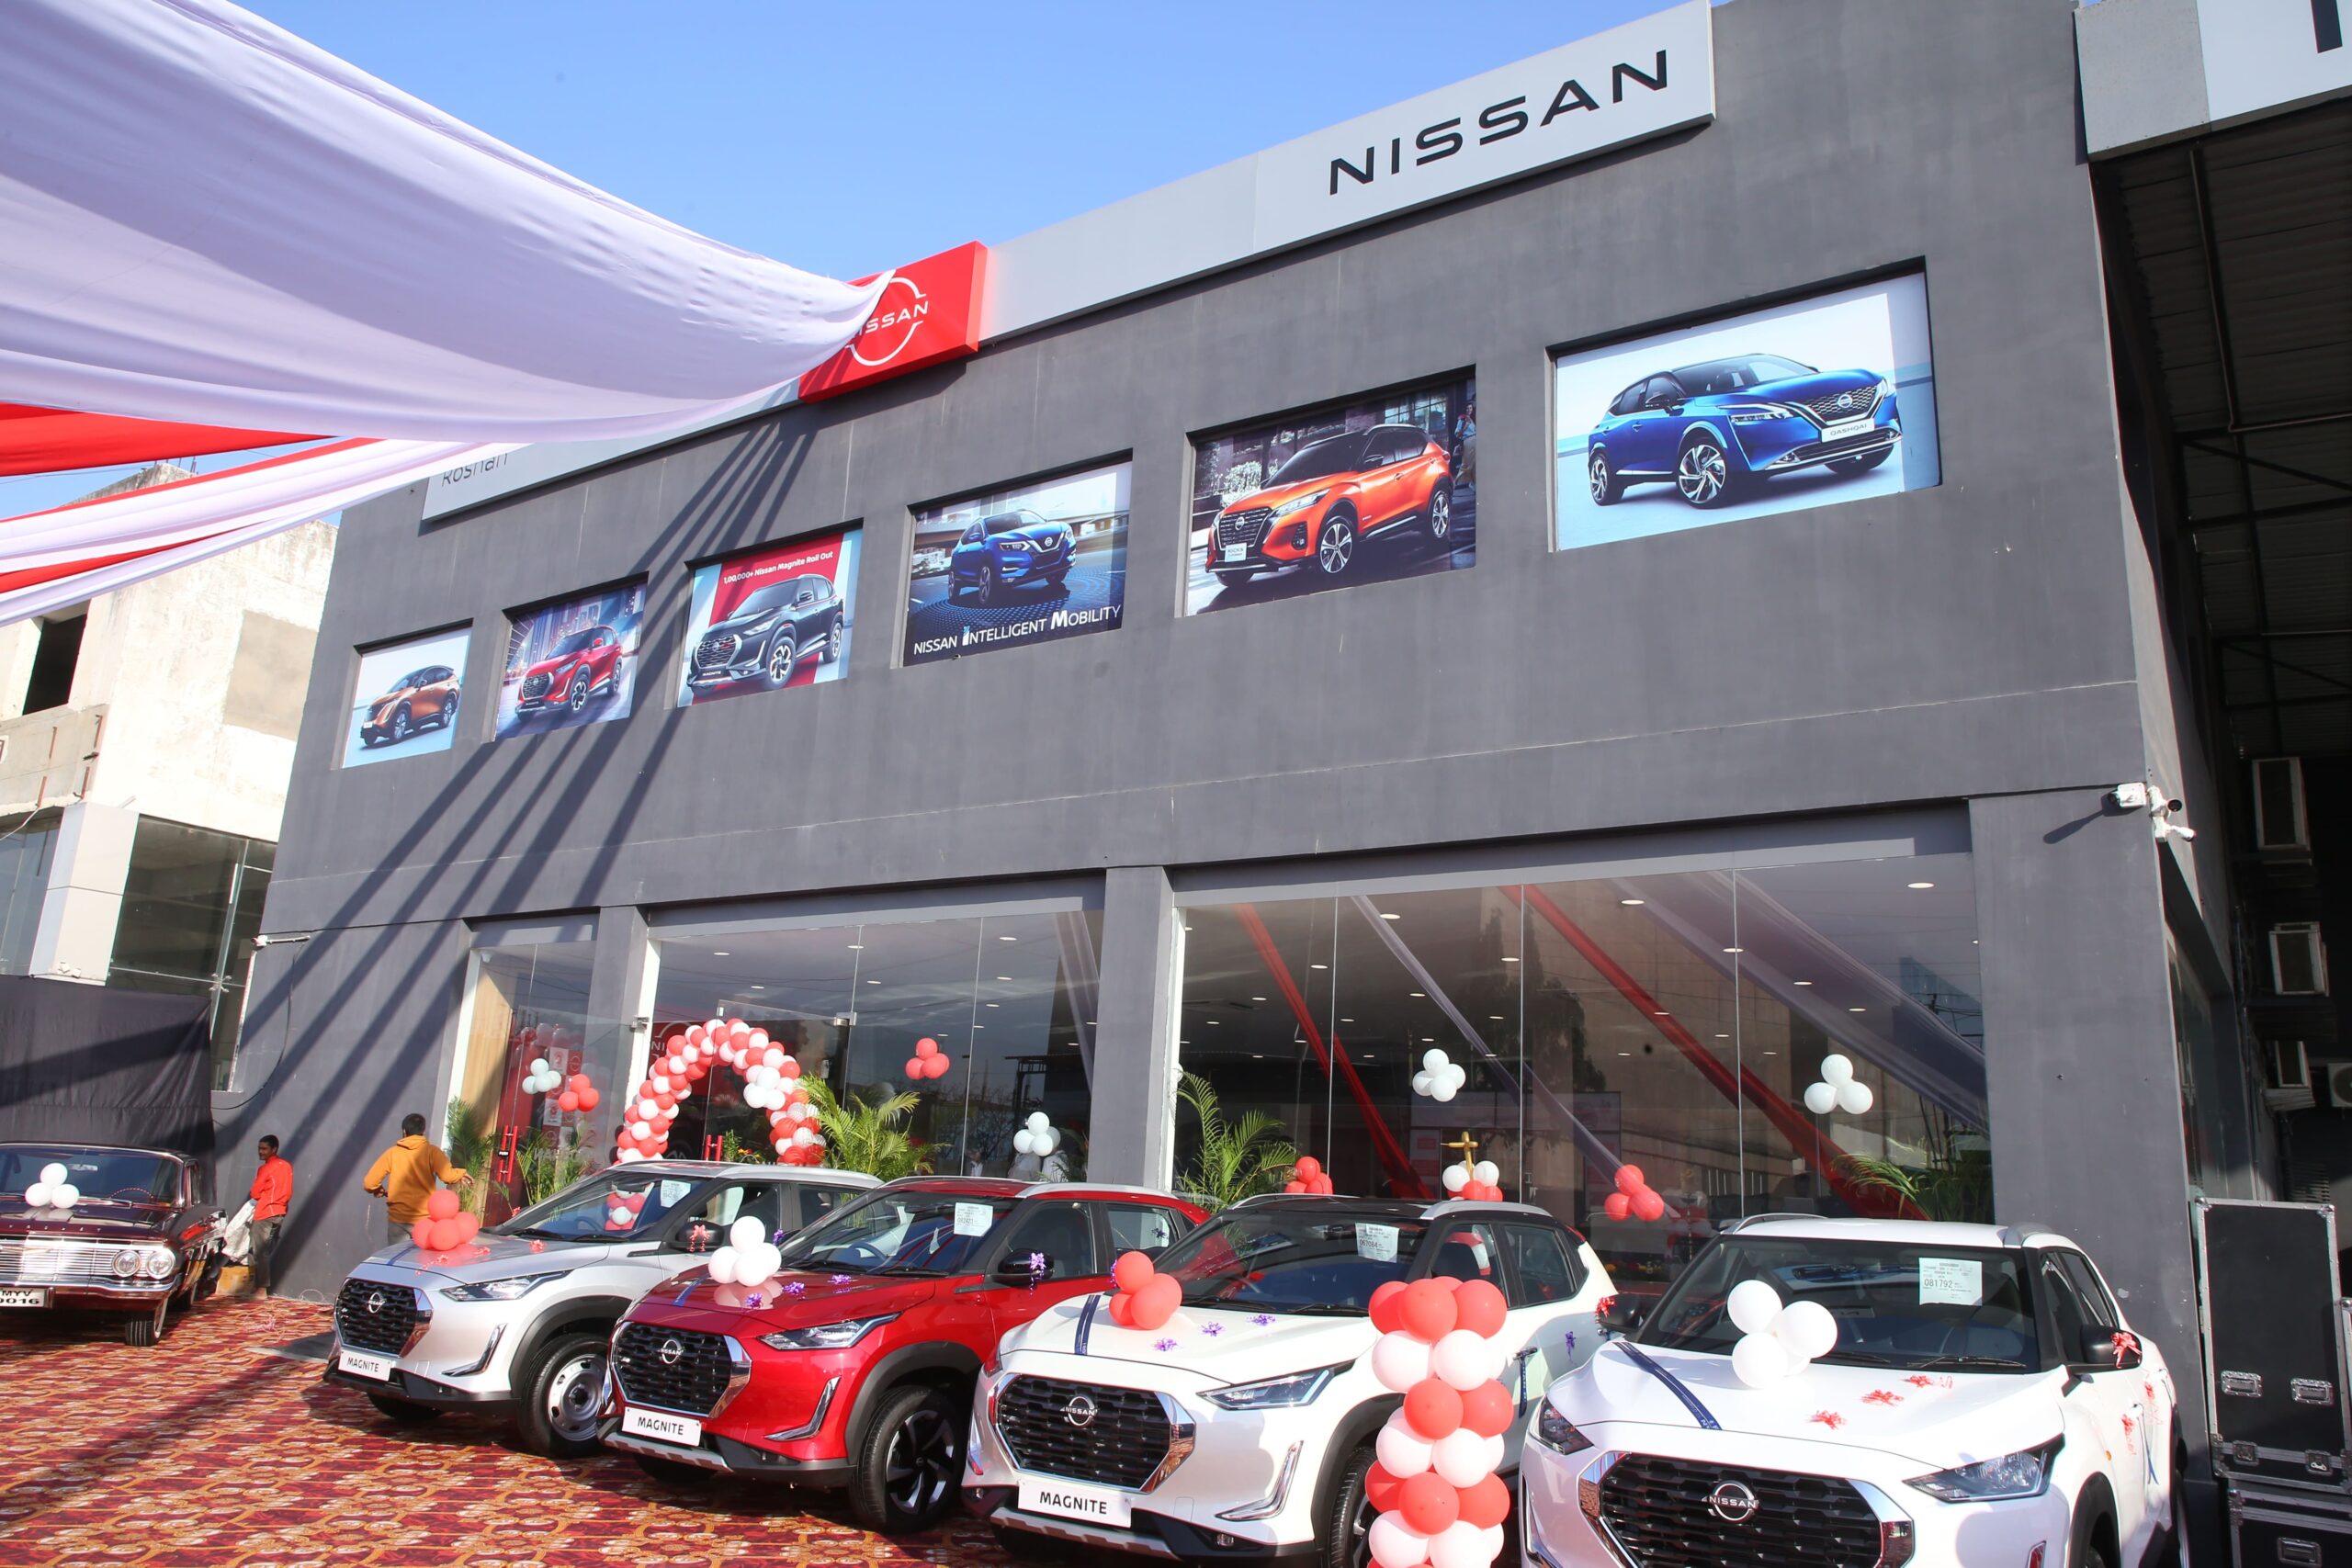 Nissan Expands Dealership In Rajasthan With Two New Dealerships